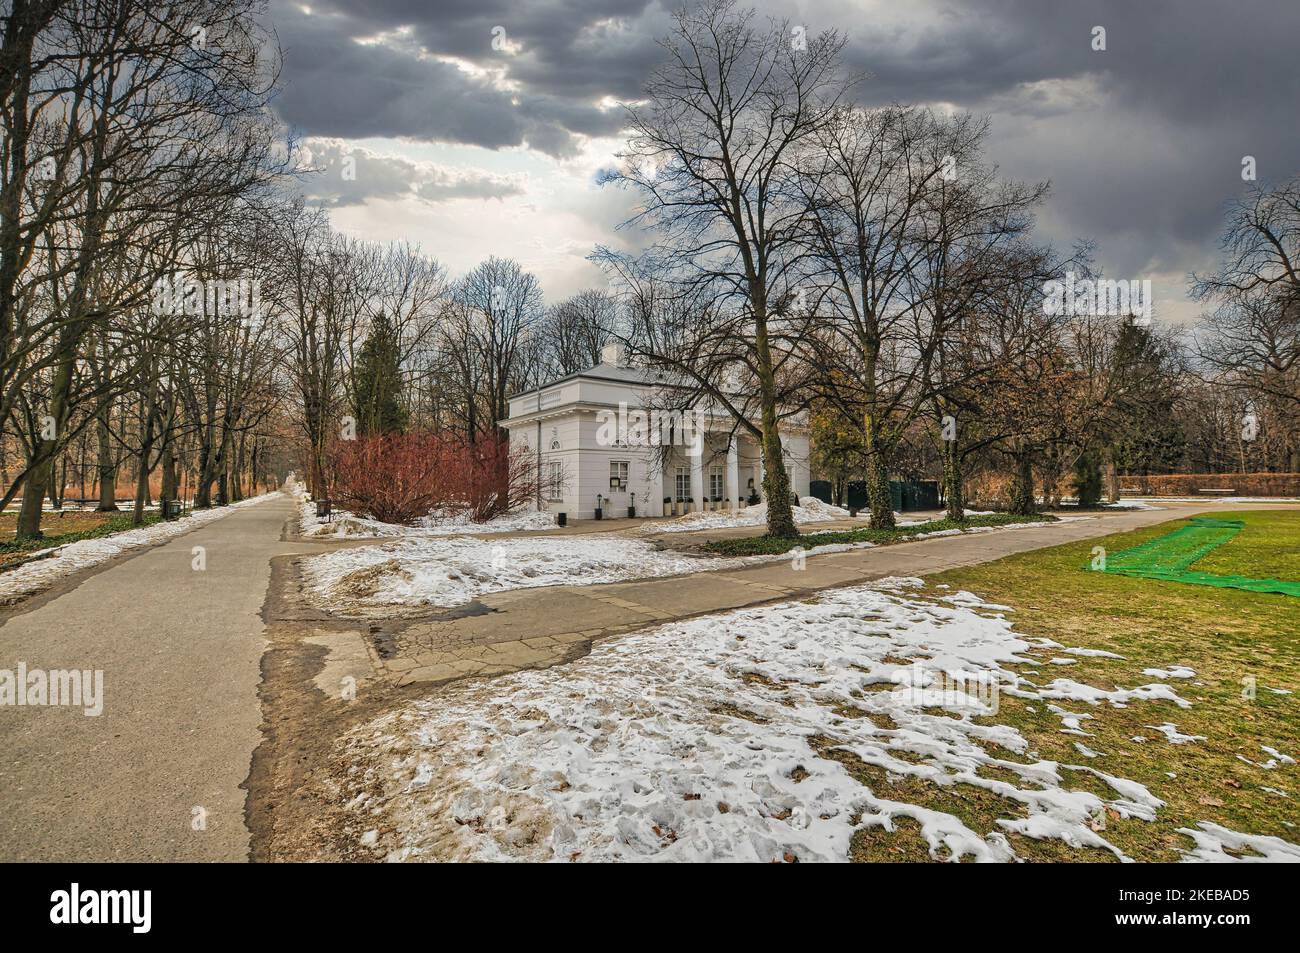 A beautiful view of The New Guardhouse in Lazienki Krolewskie Park in Poland Stock Photo